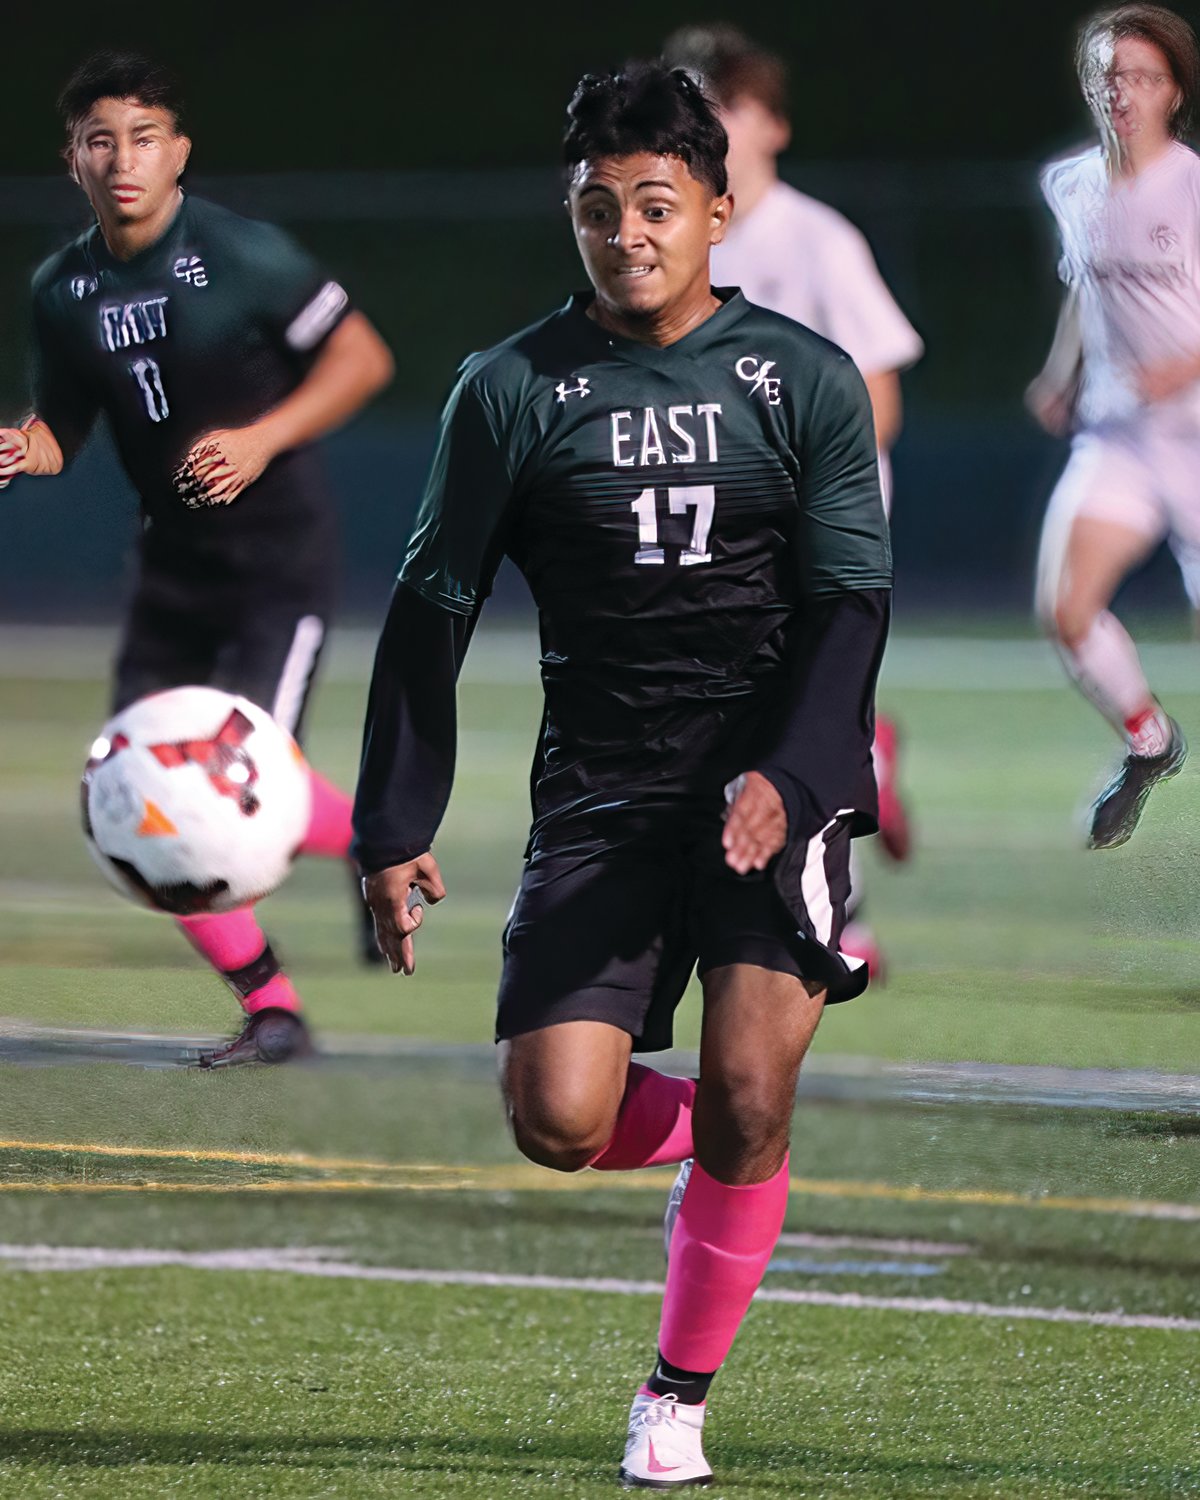 CHASING IT DOWN: Cranston East’s Sam Mejia-Torres chases down the ball in the City Cup  against West at Cranston Stadium.